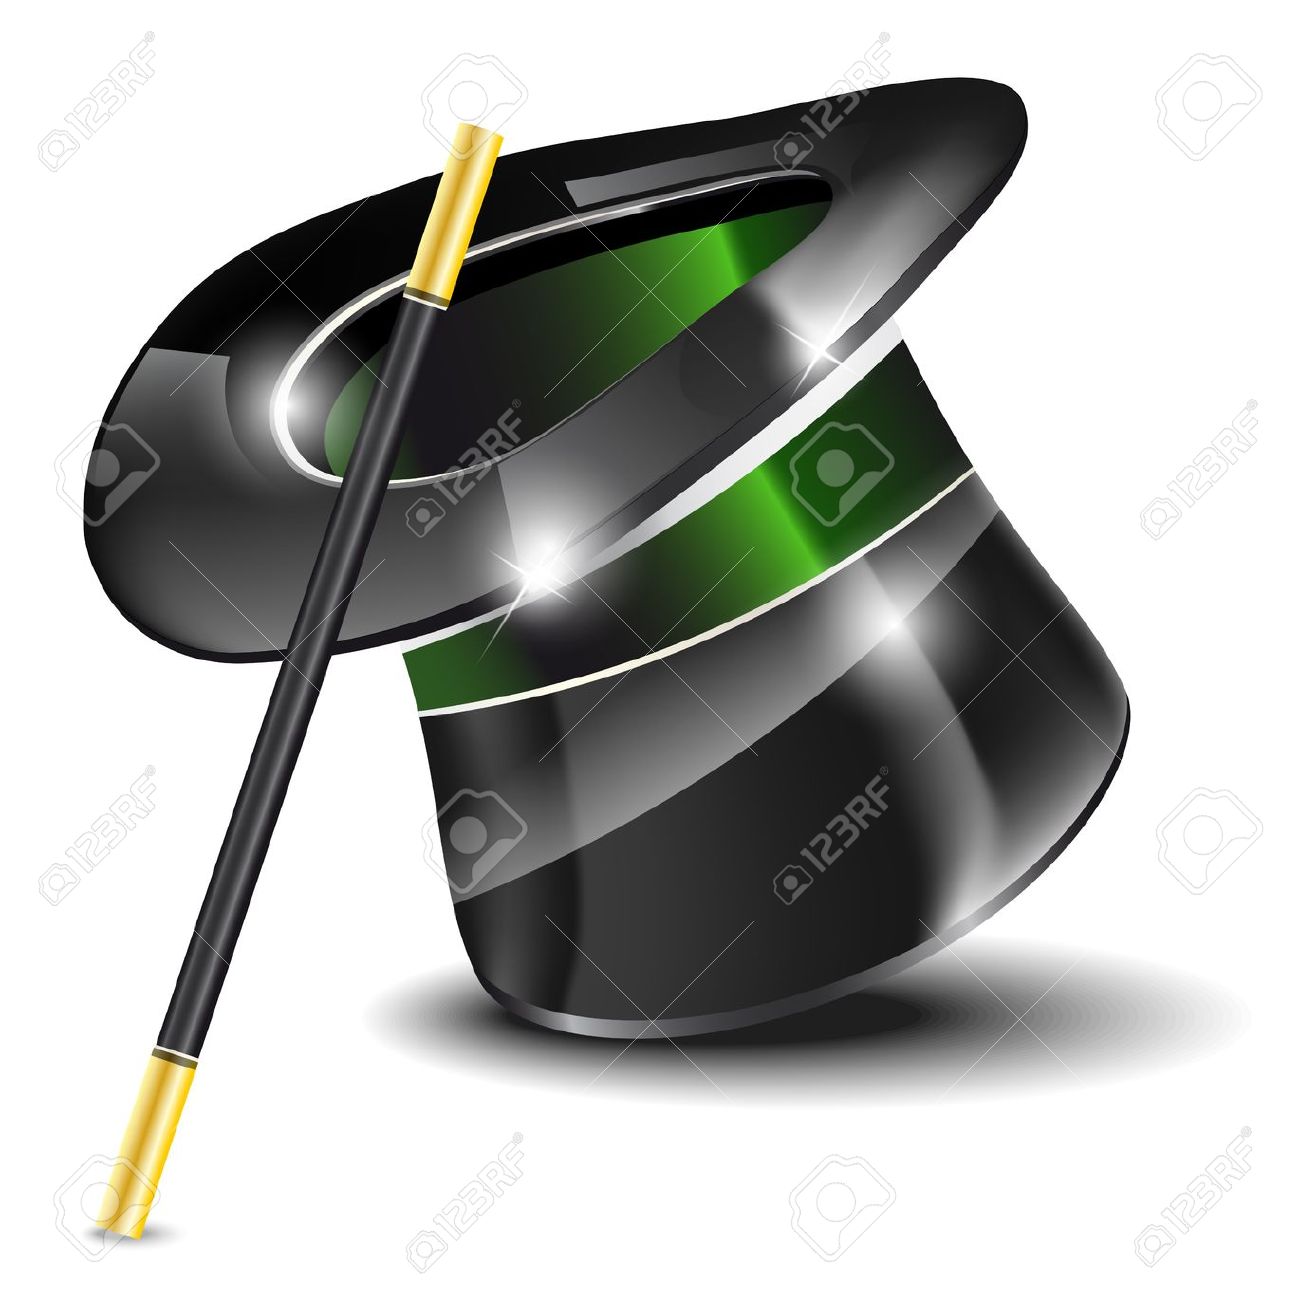 Glossy Magic Hat And Wand On White Background.